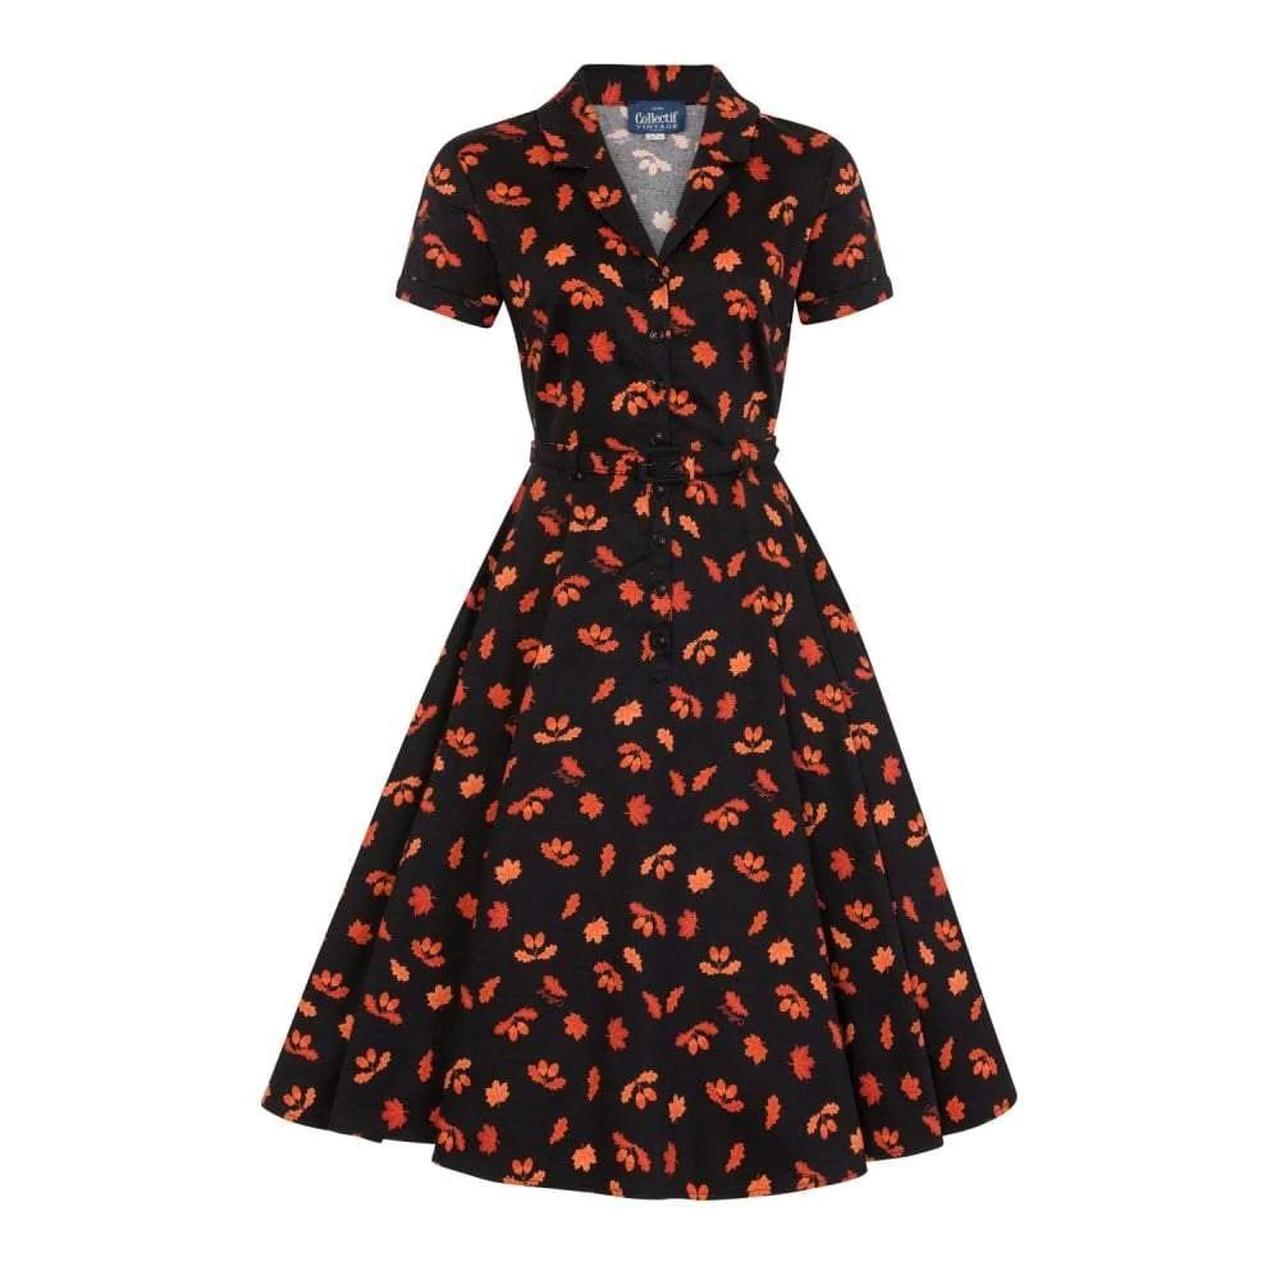 Product Image 2 - Collectif discontinued Autumn Acorn Dress
Size